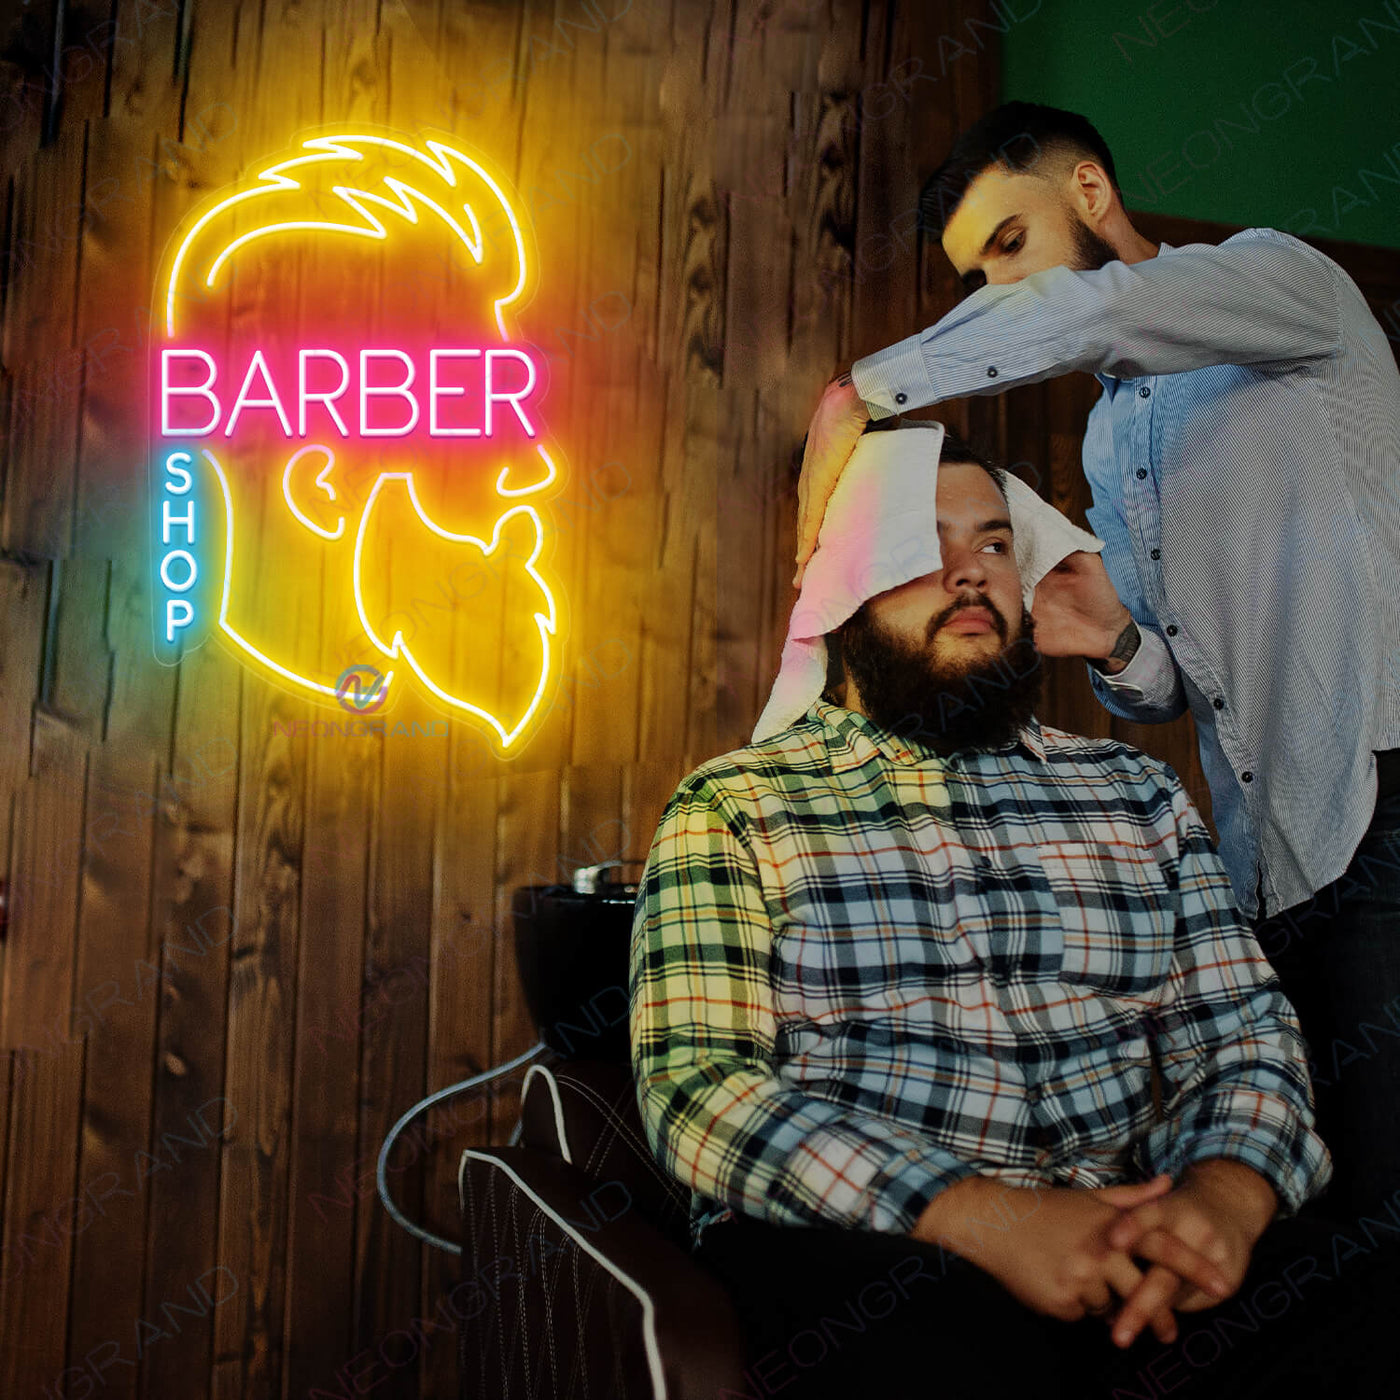 Barber Shop Neon Sign Led Light yellow mix